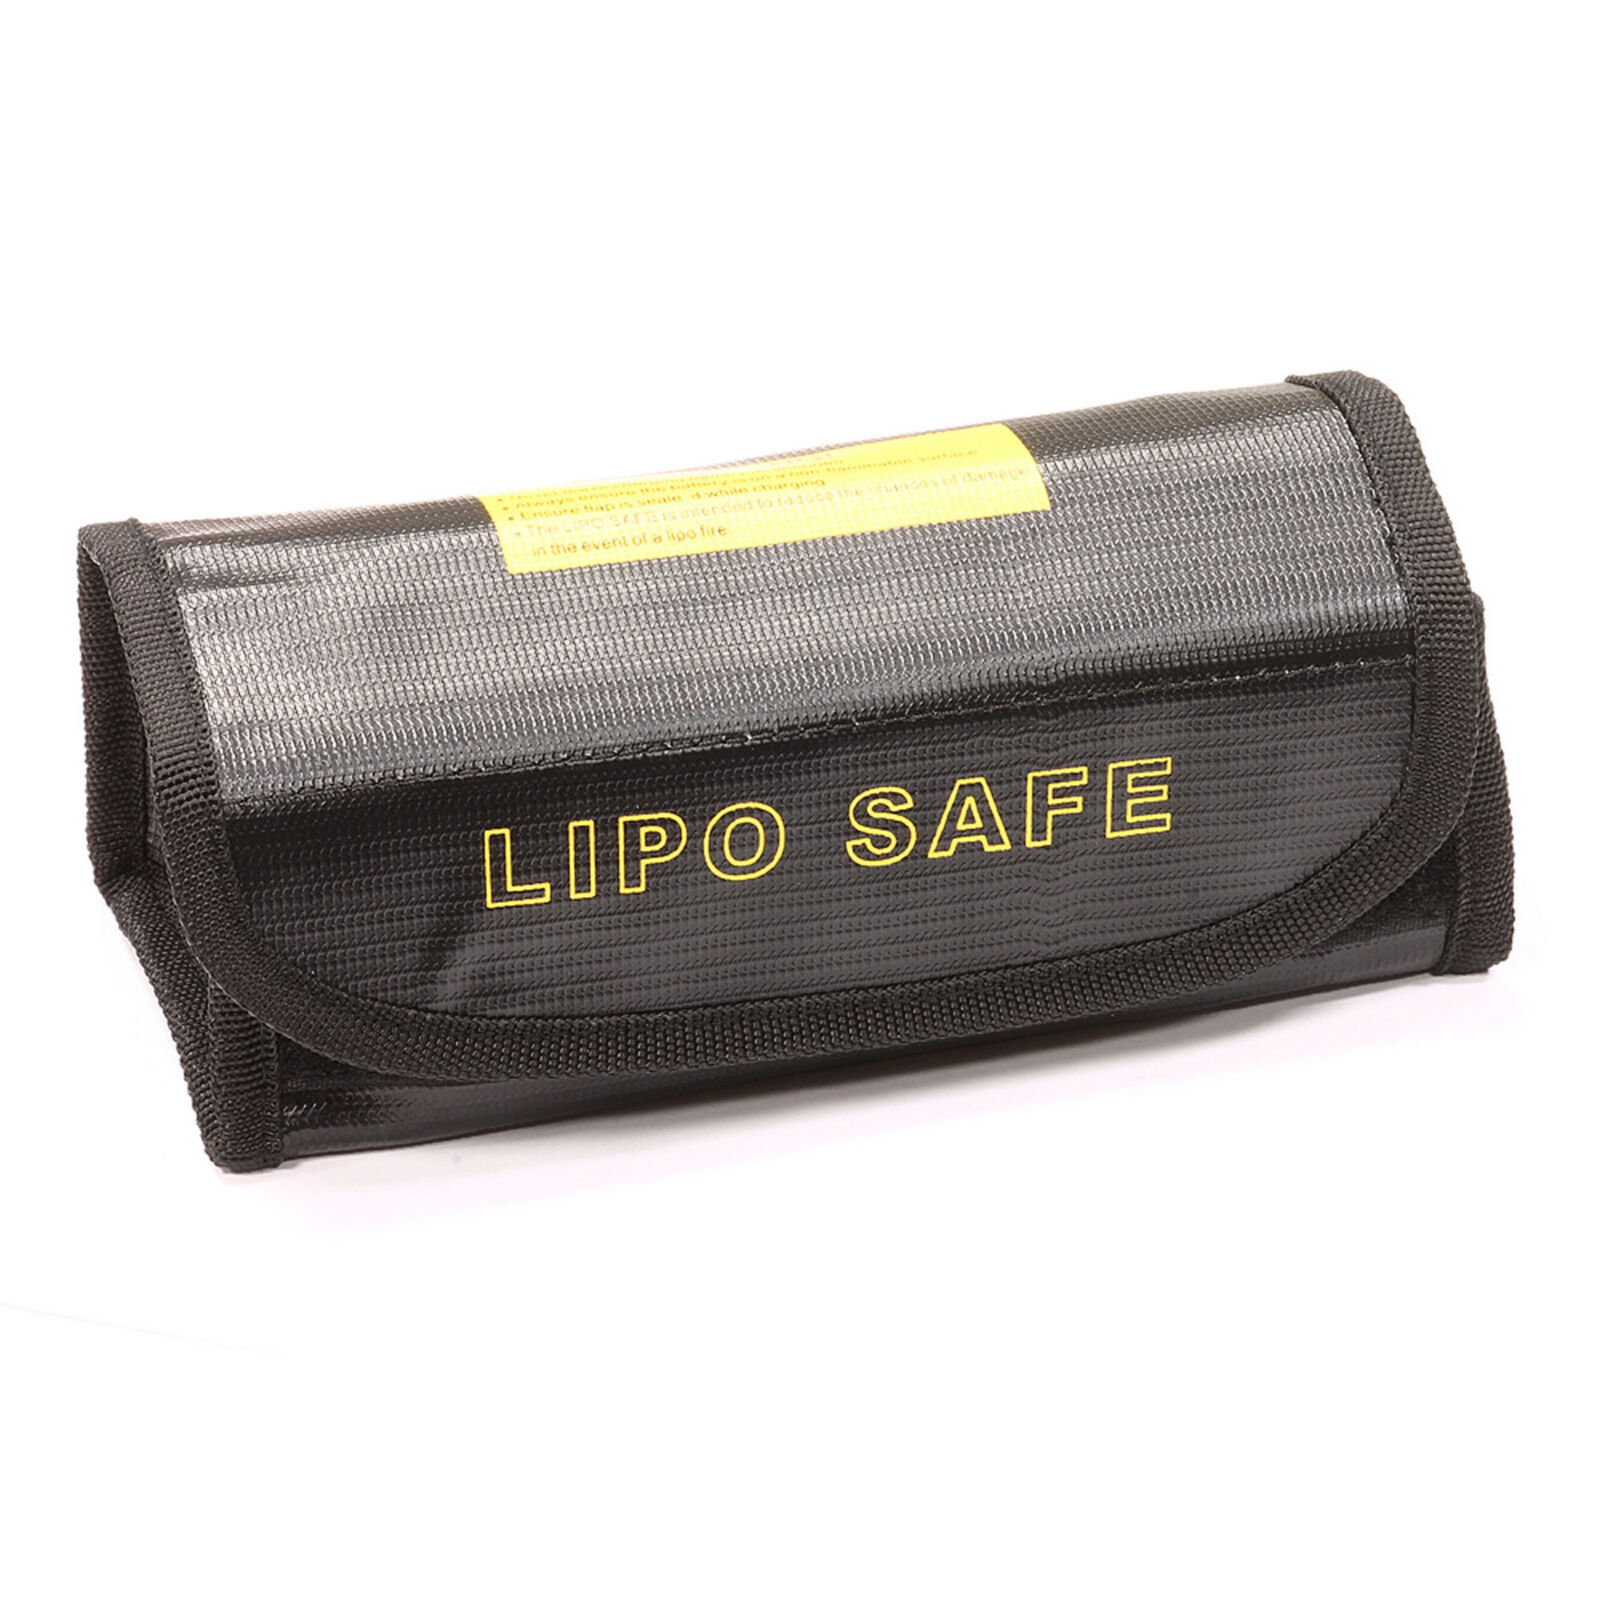 LiPo Guard Case for Charging and Storing, Black